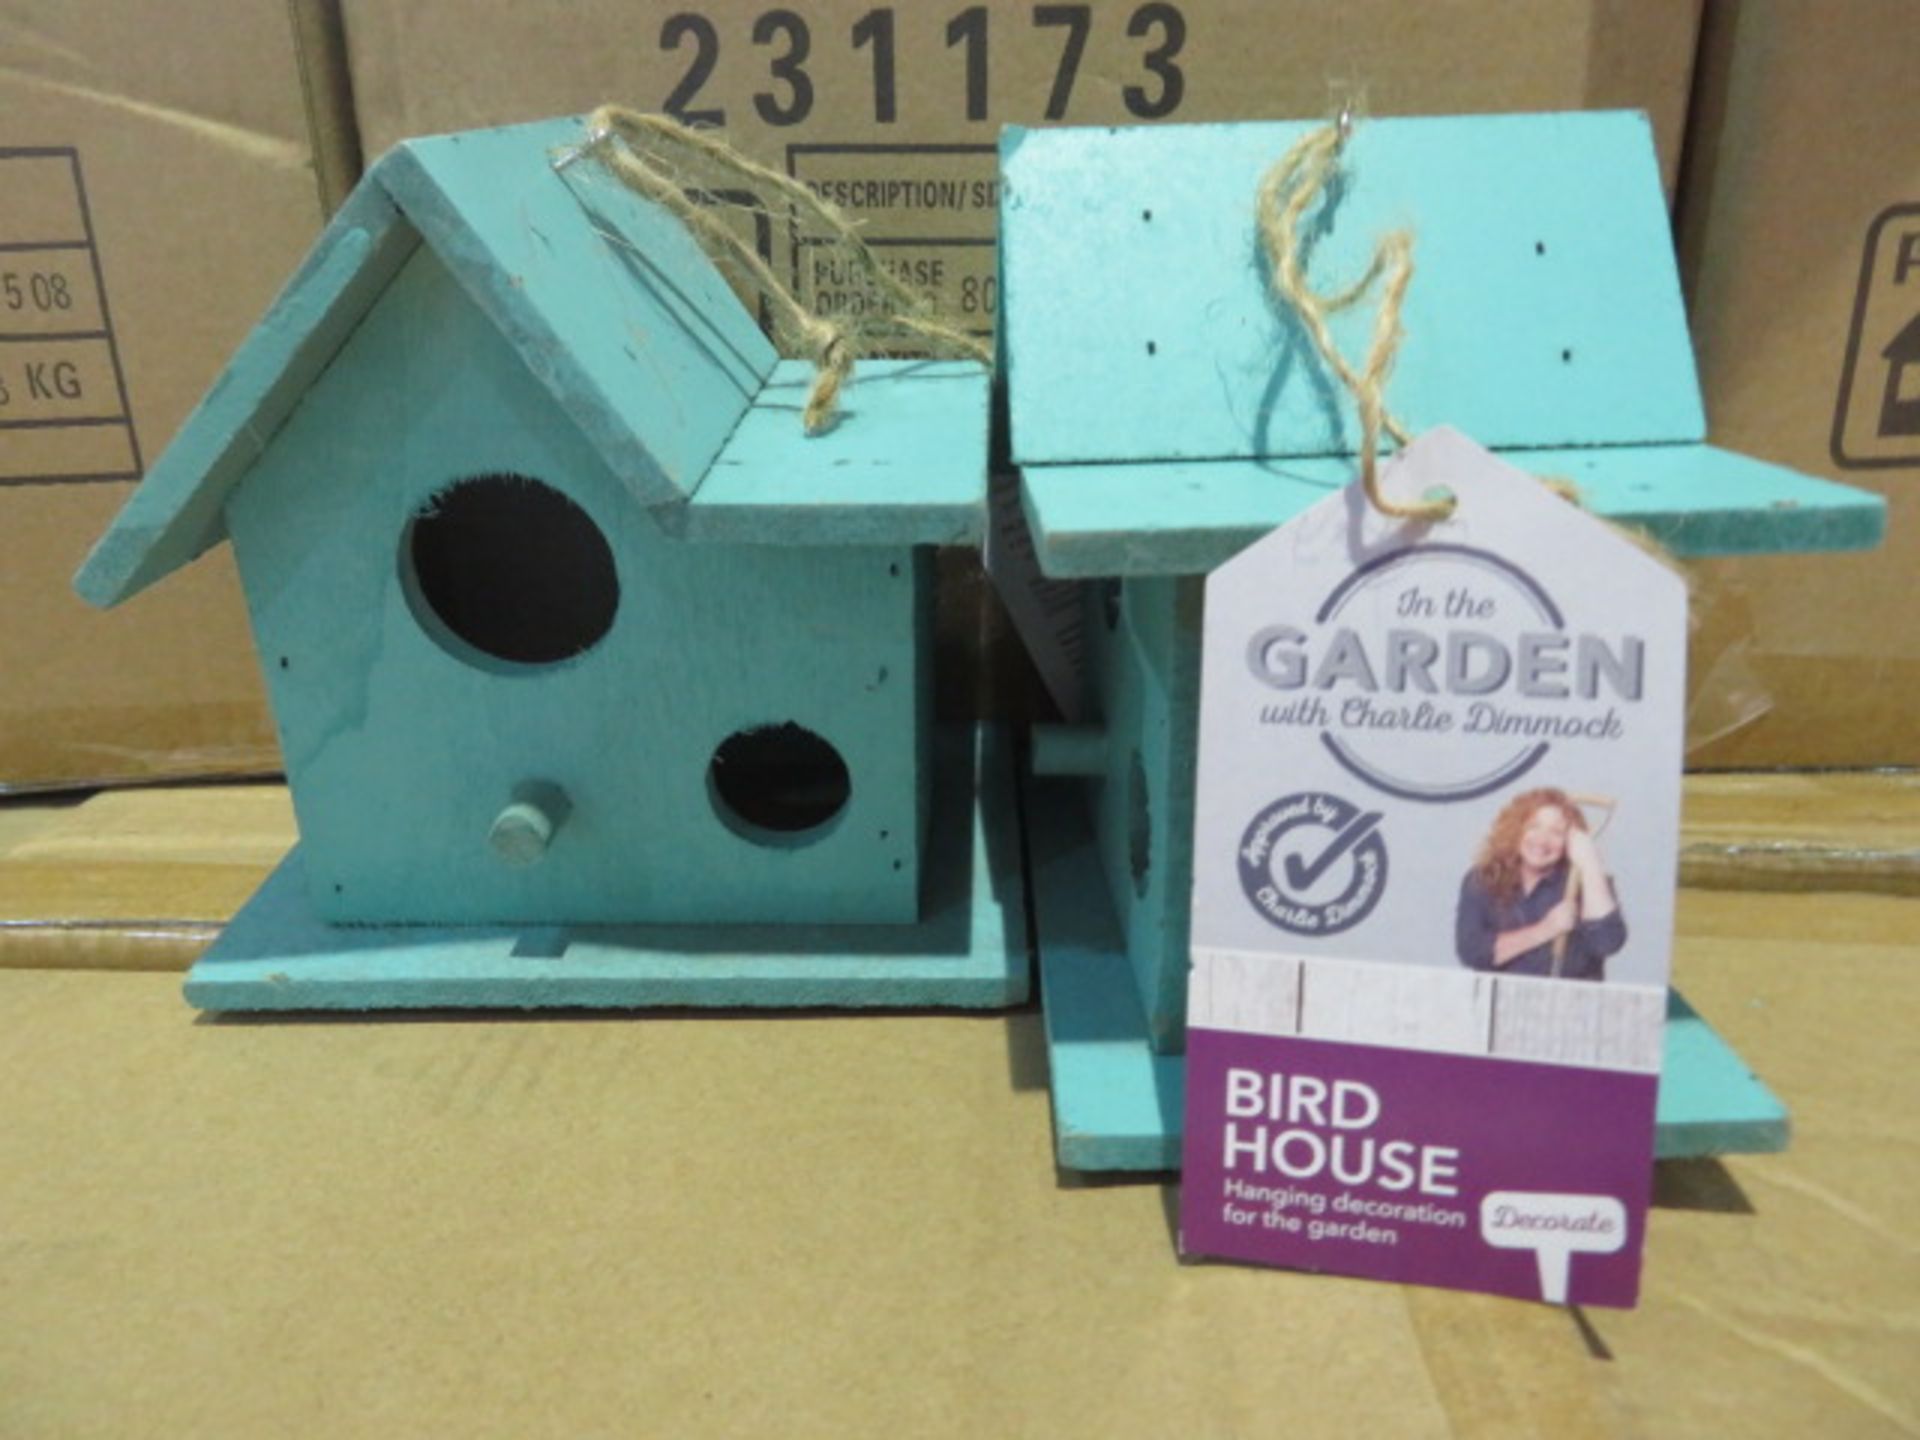 (40) PALLET TO CONTAIN 432 x BRAND NEW WOODEN BIRD BOX/HOUSE. RRP £3.99 EACH. UK PALLET DELIVE...